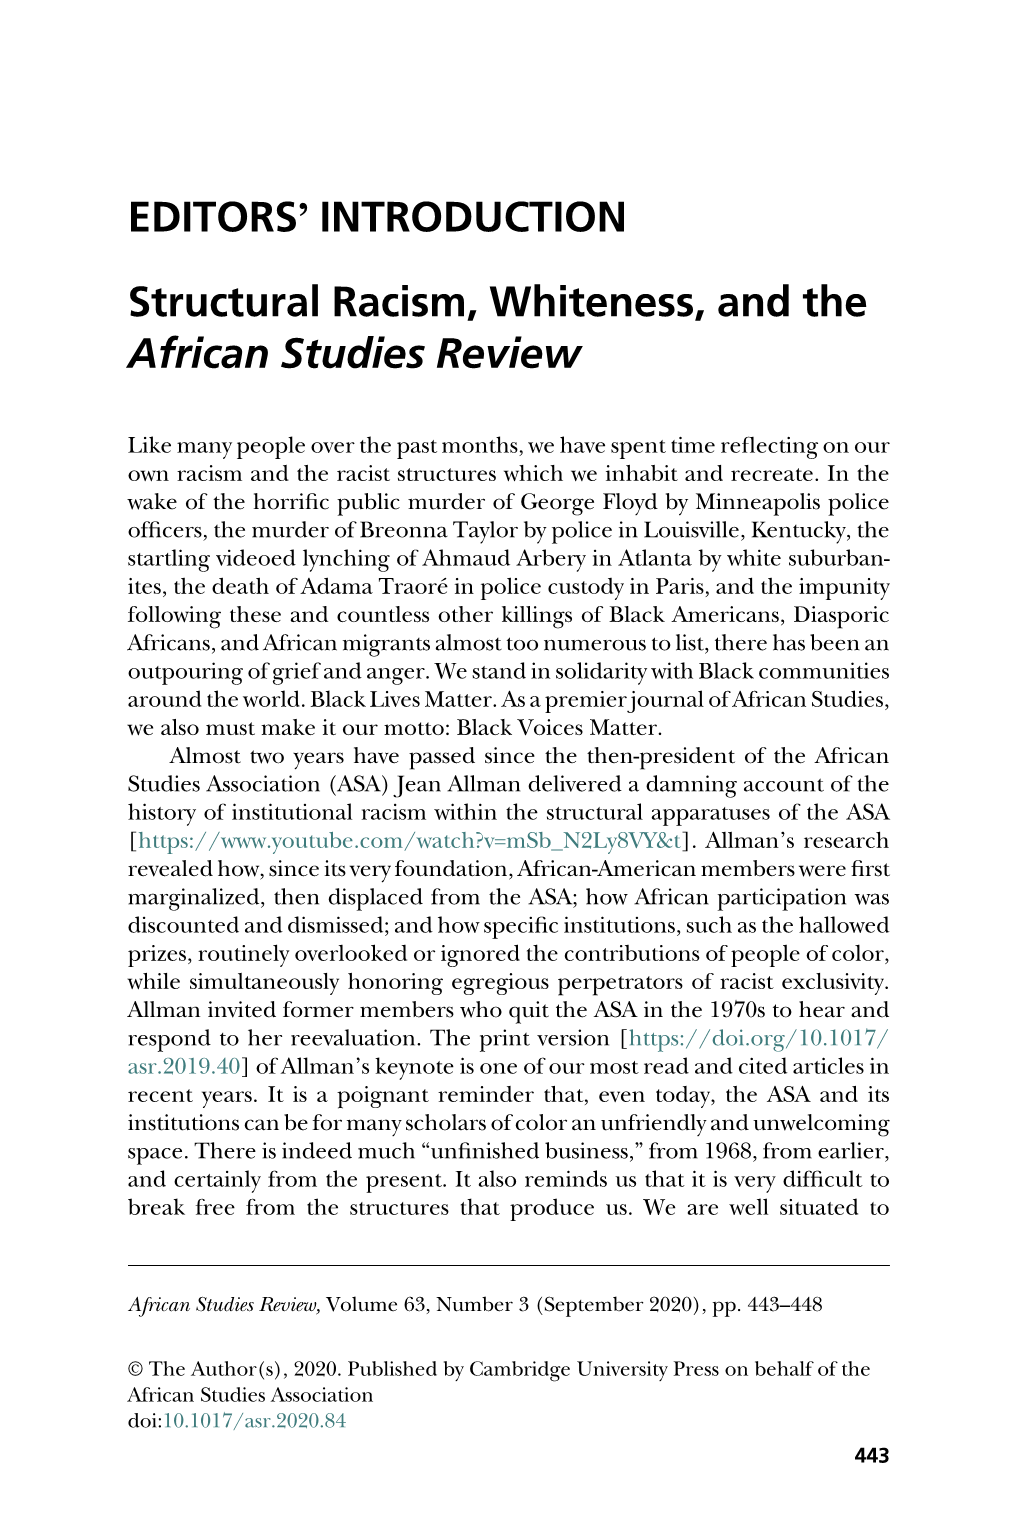 EDITORS' INTRODUCTION Structural Racism, Whiteness, and the African